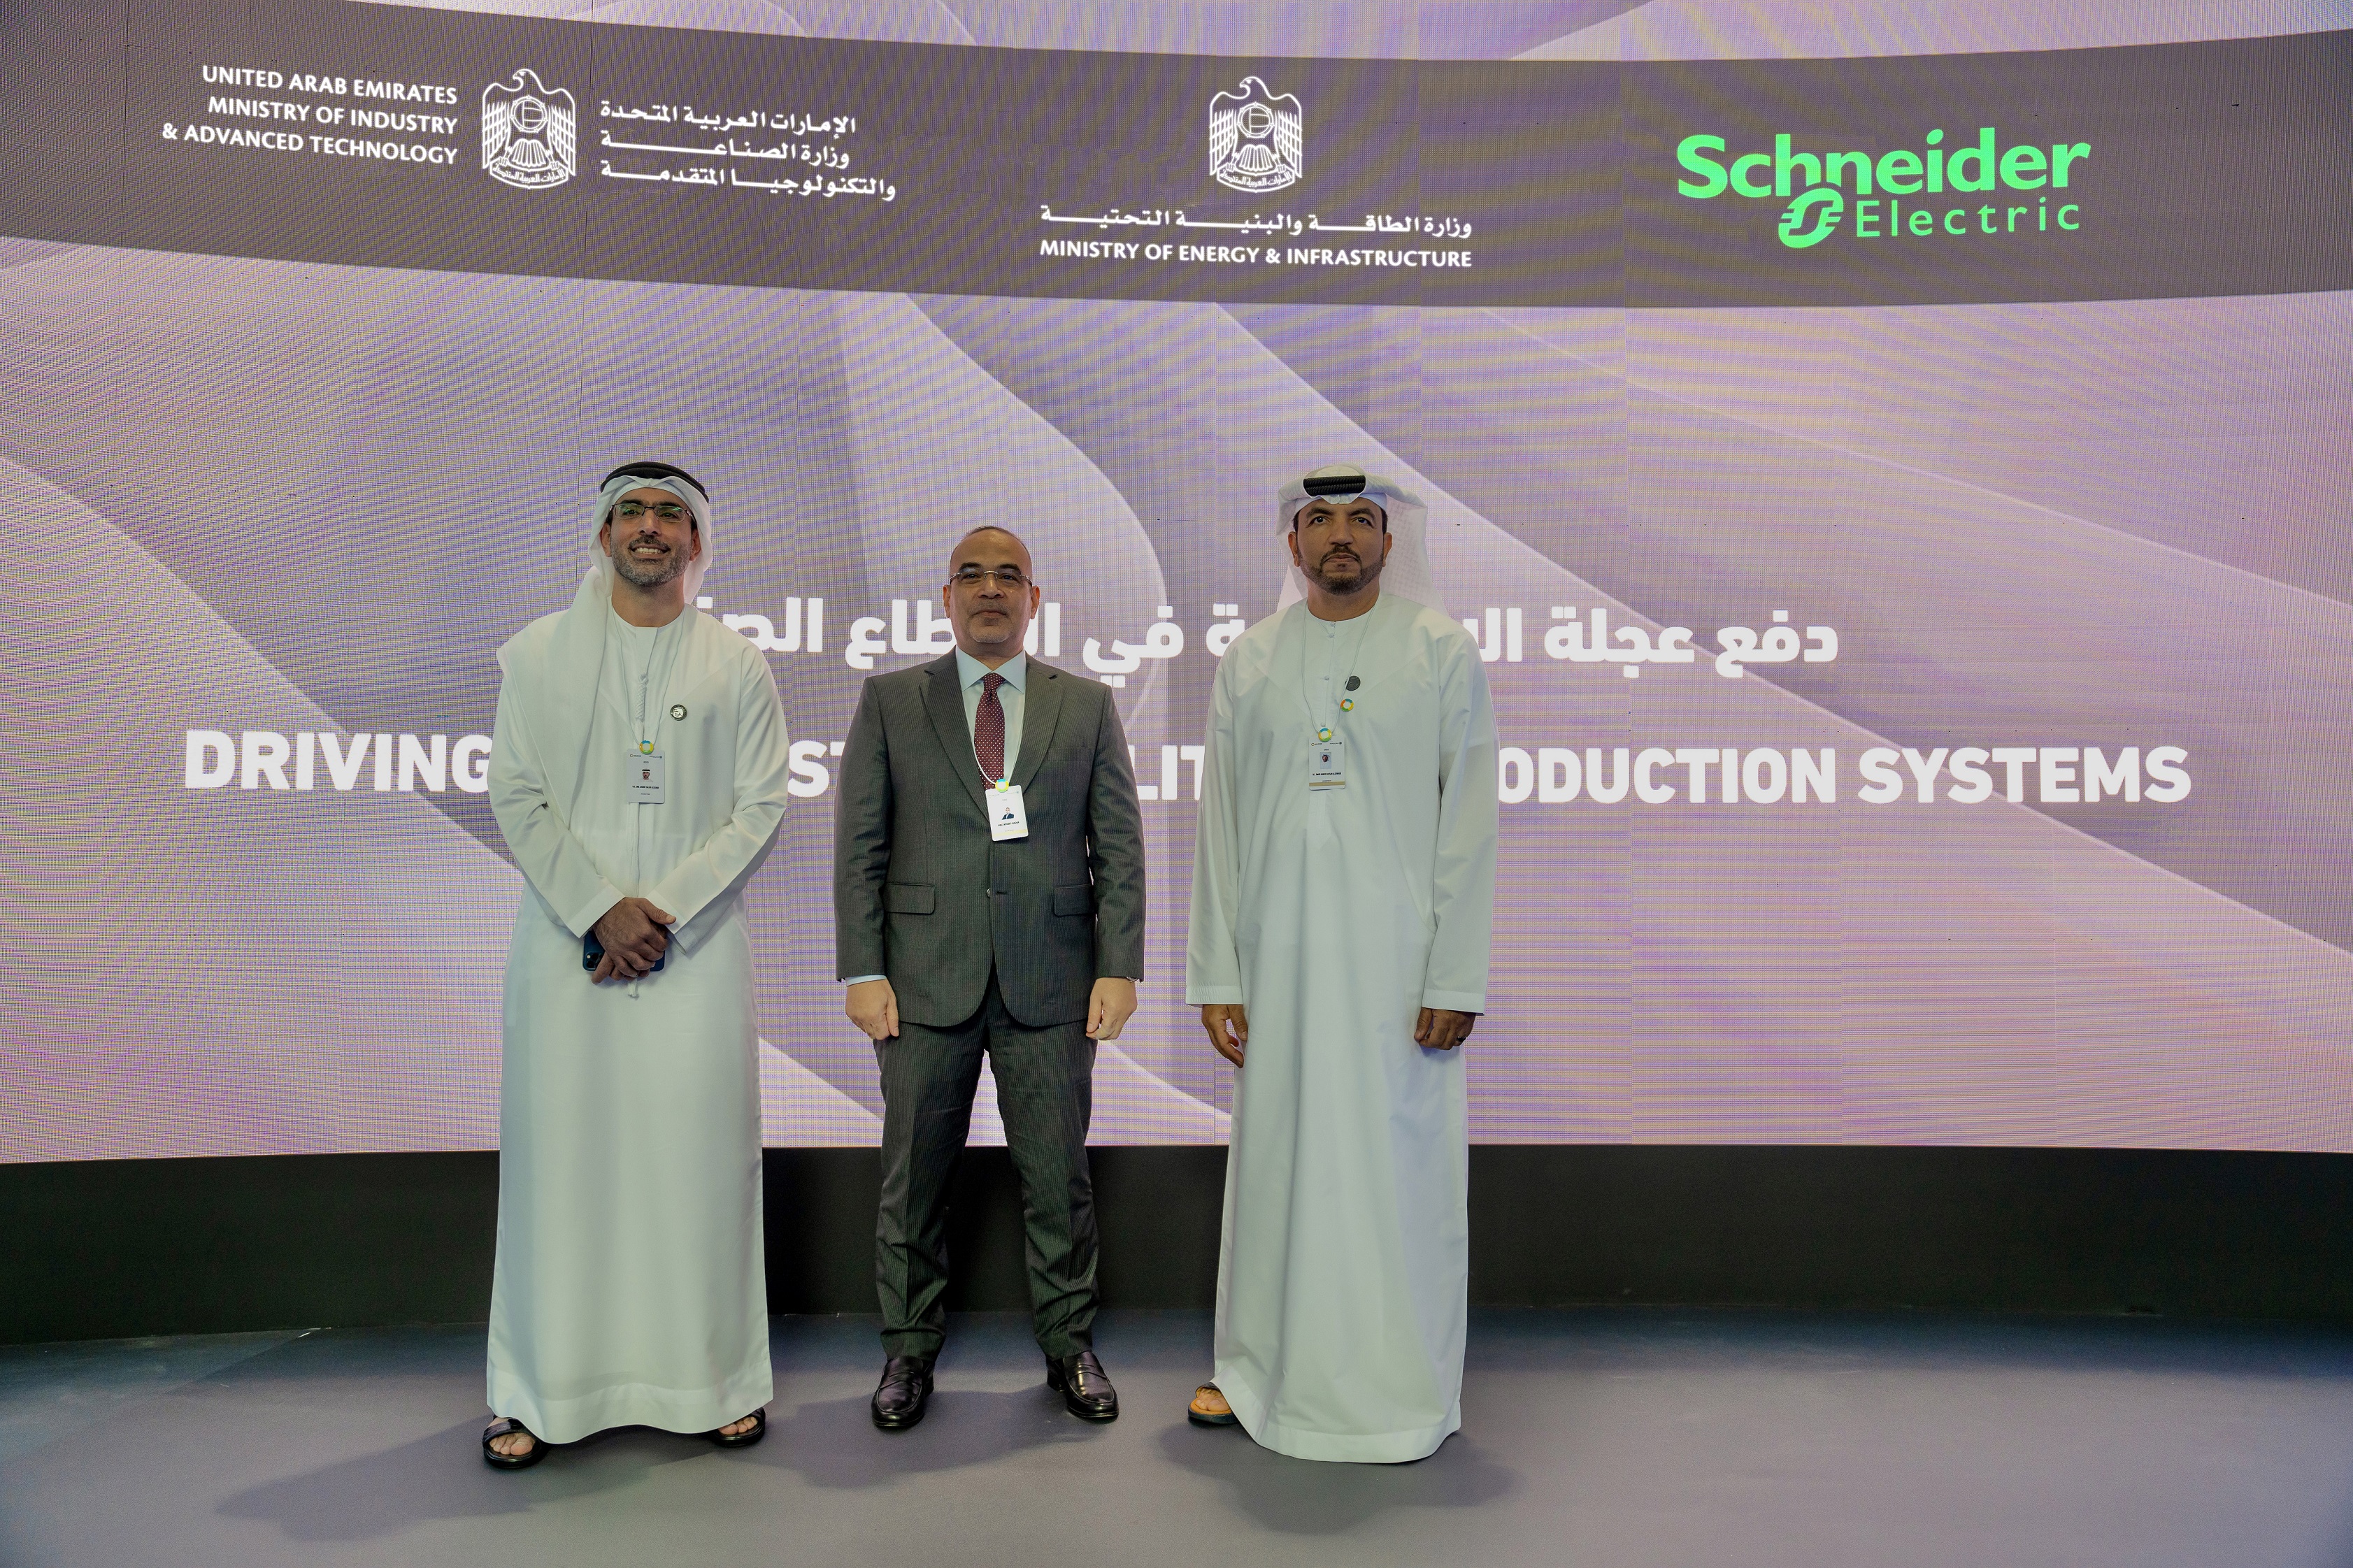 UAE industry and energy ministries join forces with Schneider Electric to boost energy efficiency in industry